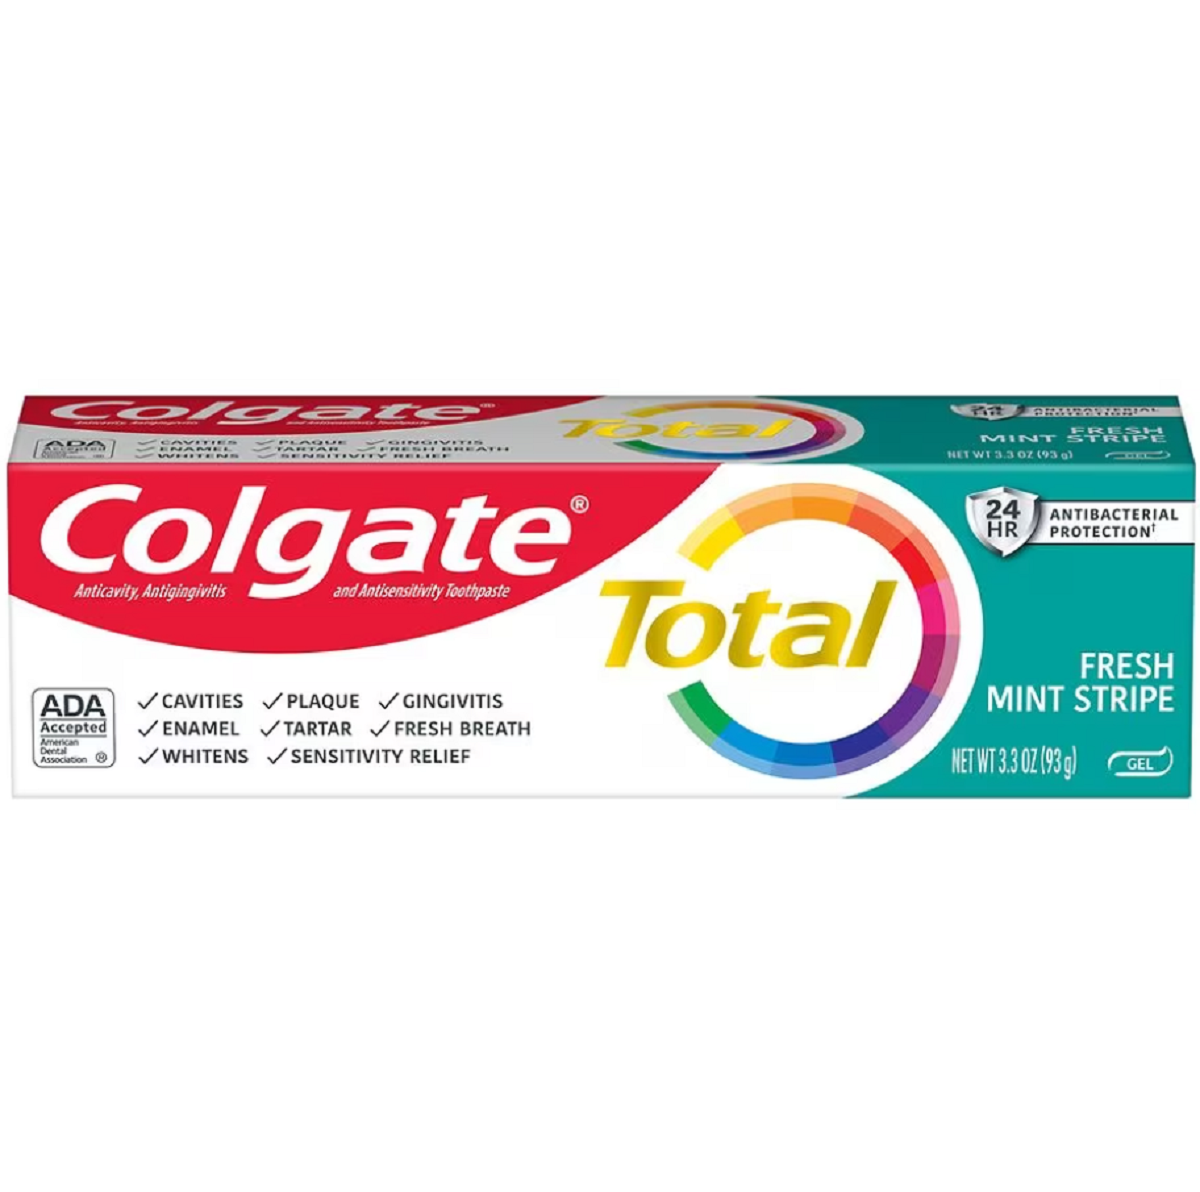 Colgate Total Toothpaste Fresh Mint Stripe, Colgate products printable coupon